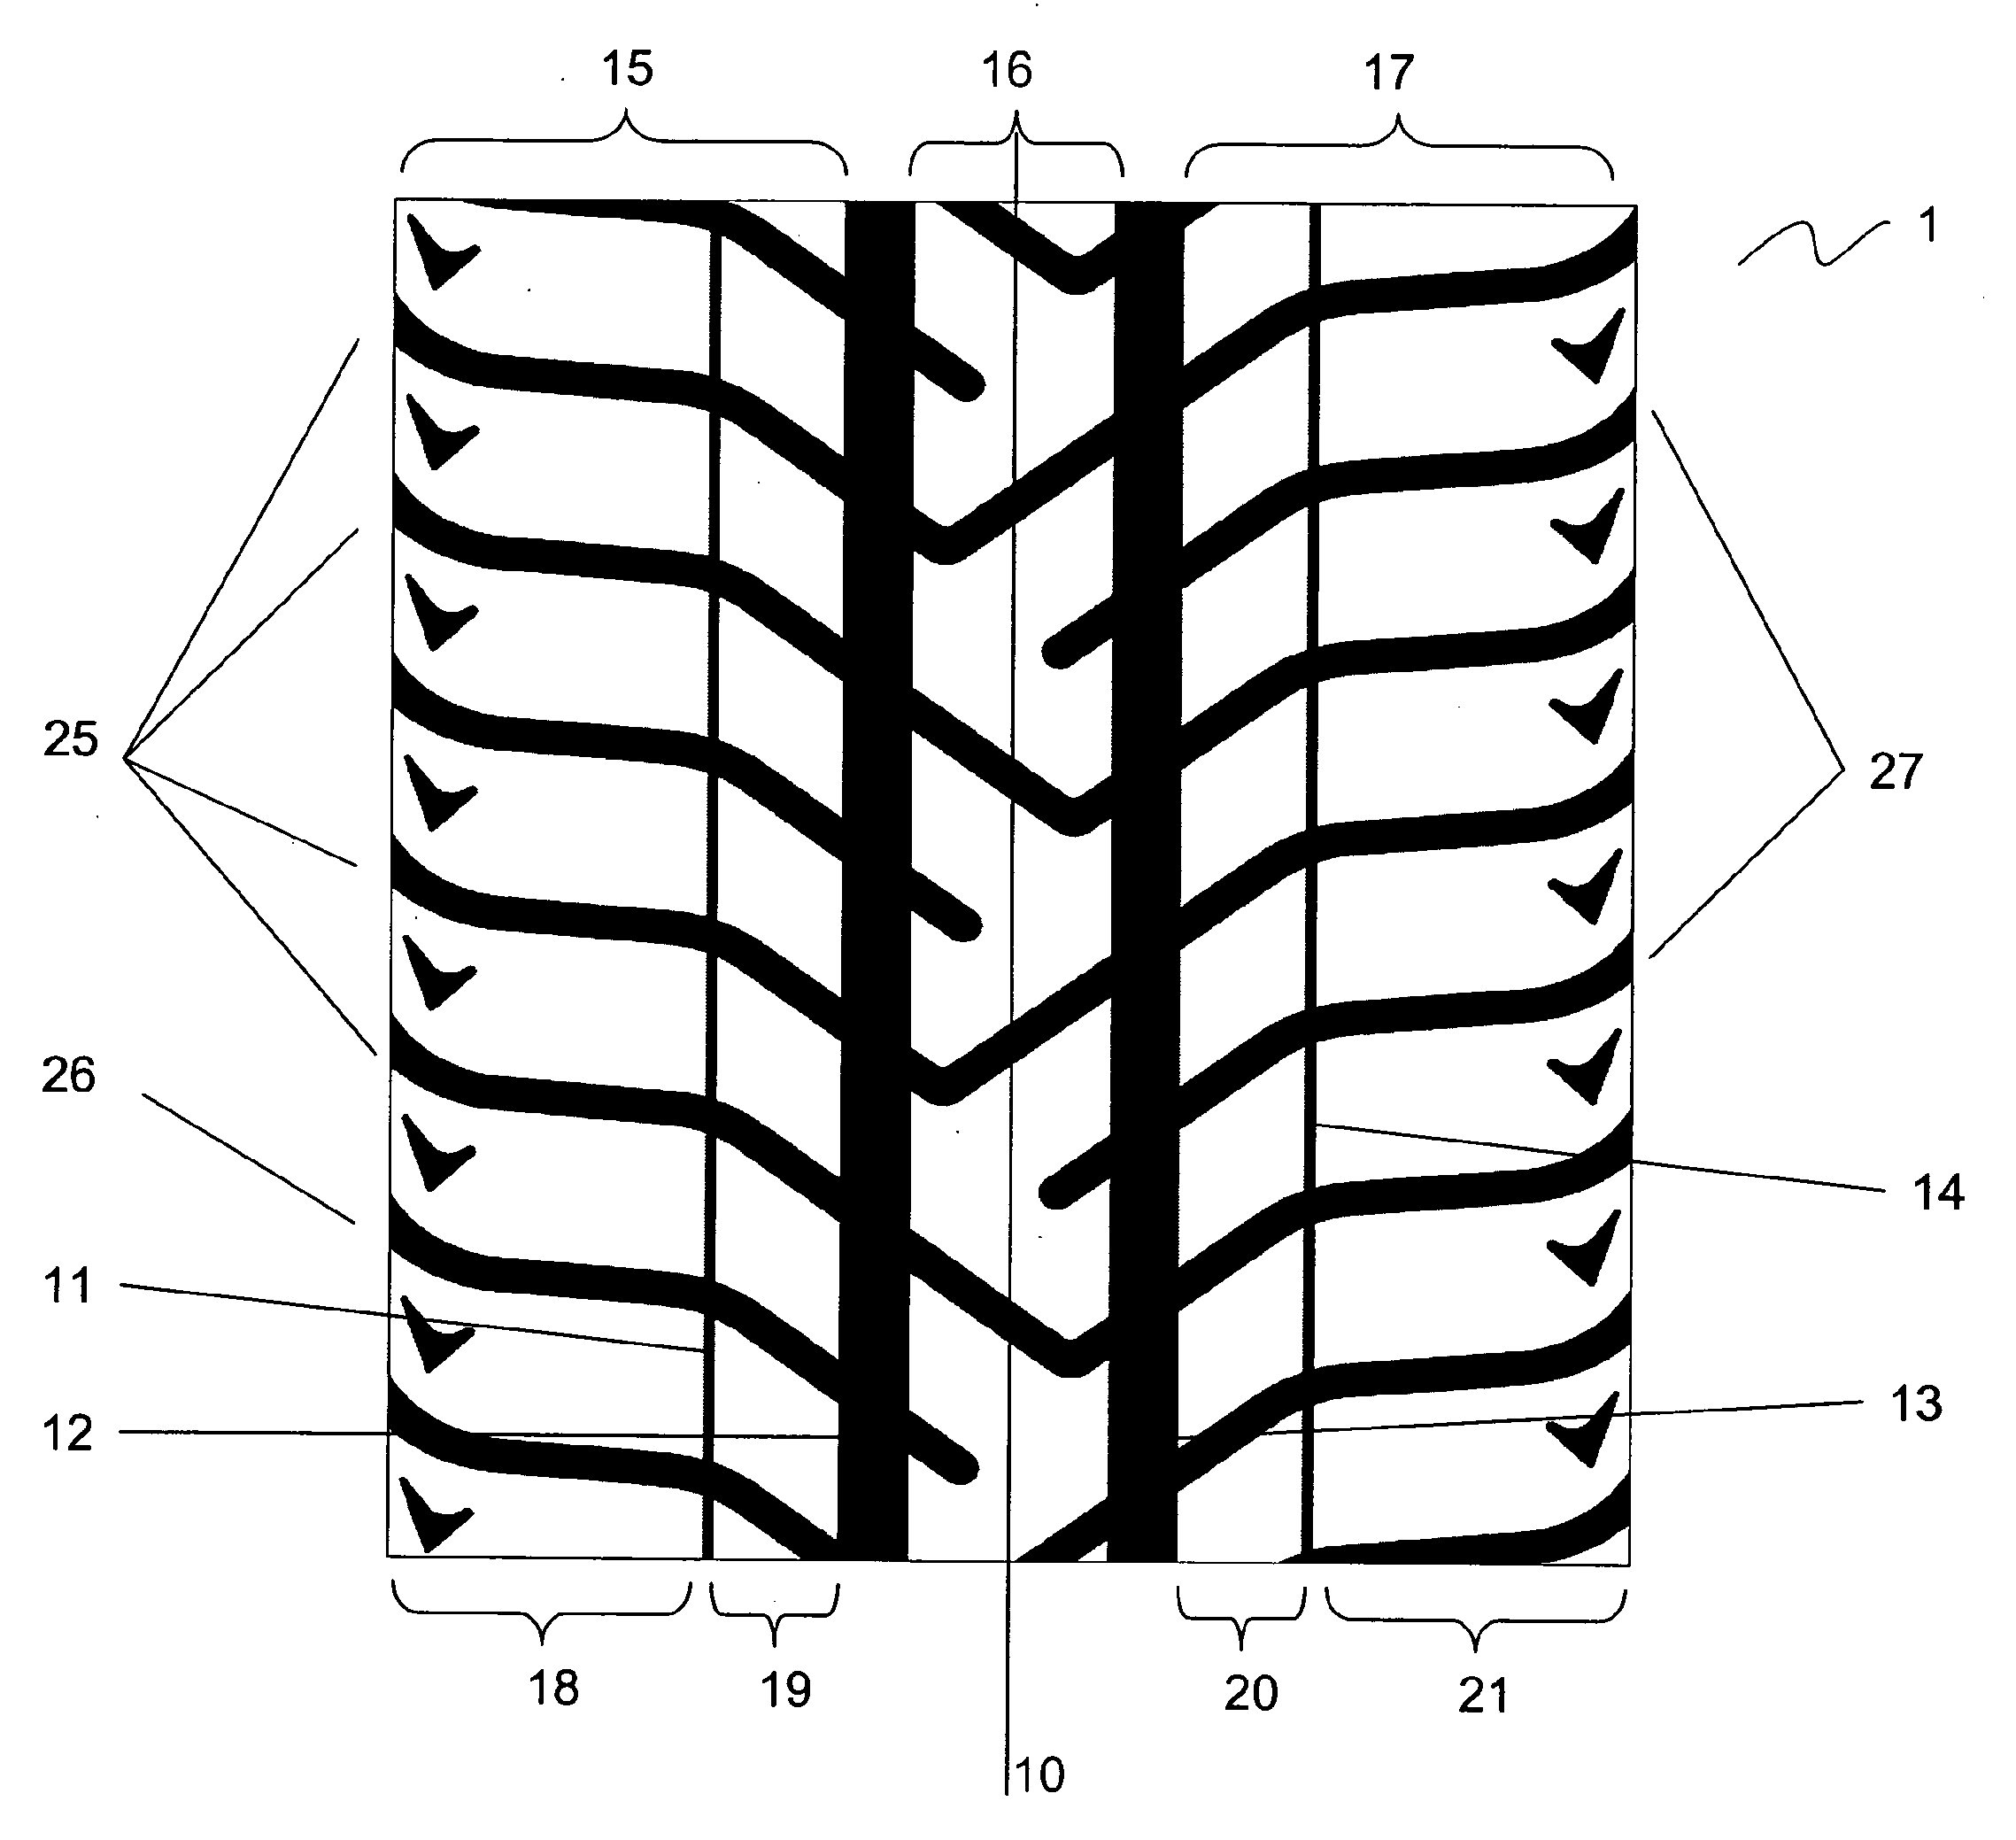 Tyre for vehicle  wheels having improved tread pattern